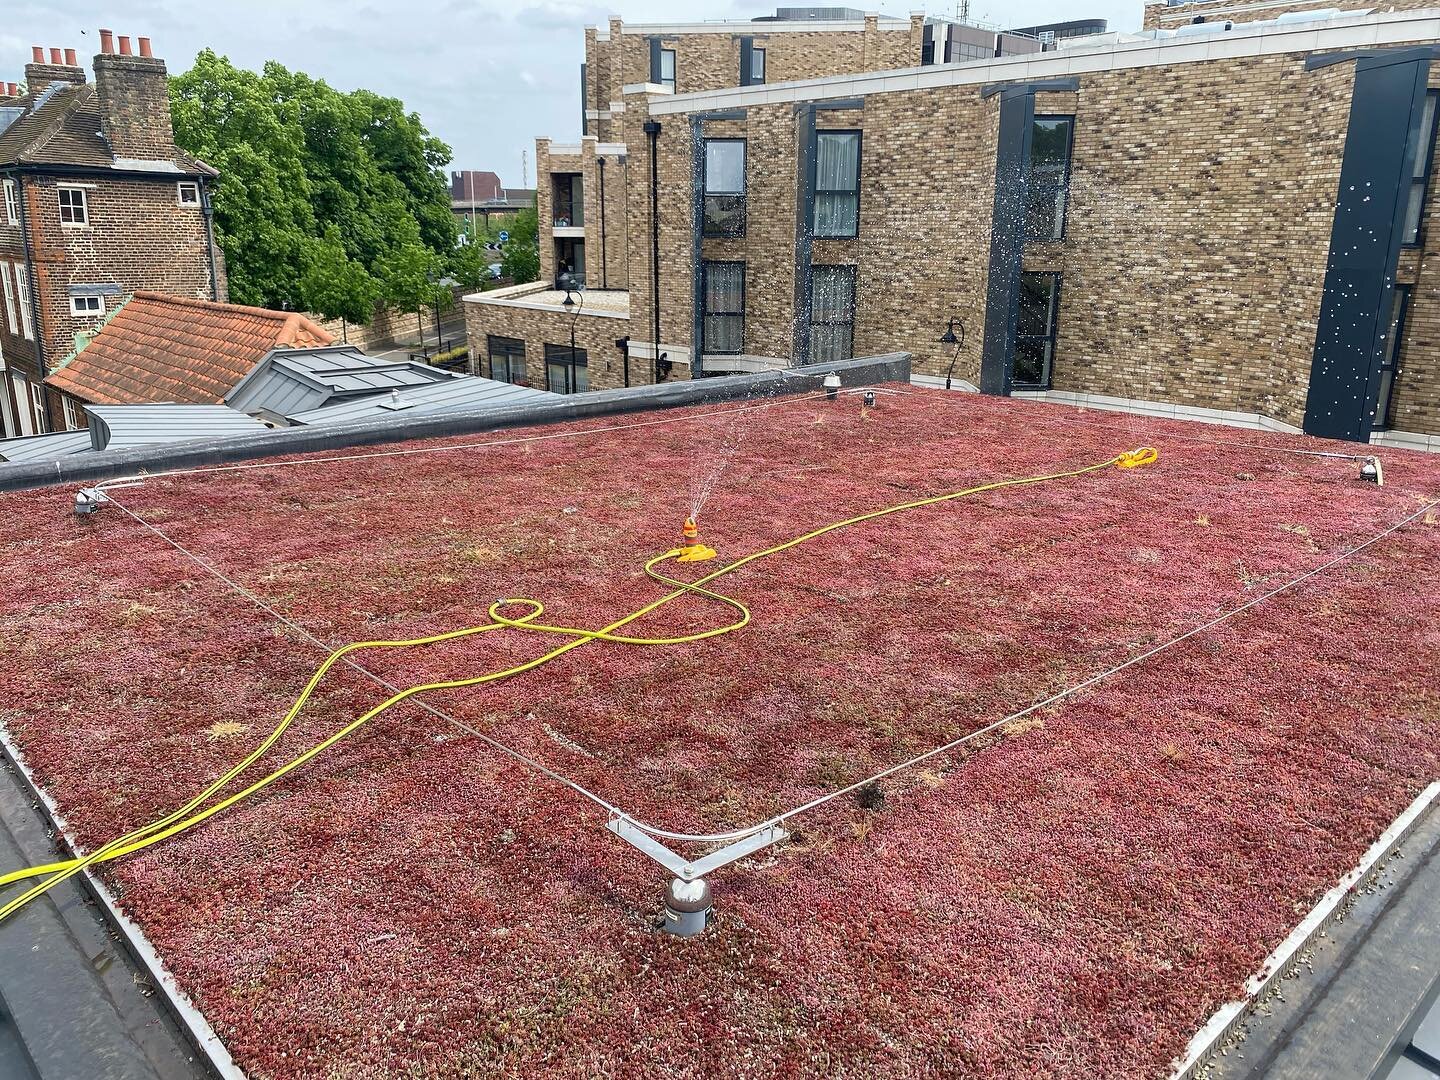 Some much needed tlc for this green roof #greenroofs #flatroofingspecialists #singleplymembrane #roofcare #roofmaintenance #waterproofing